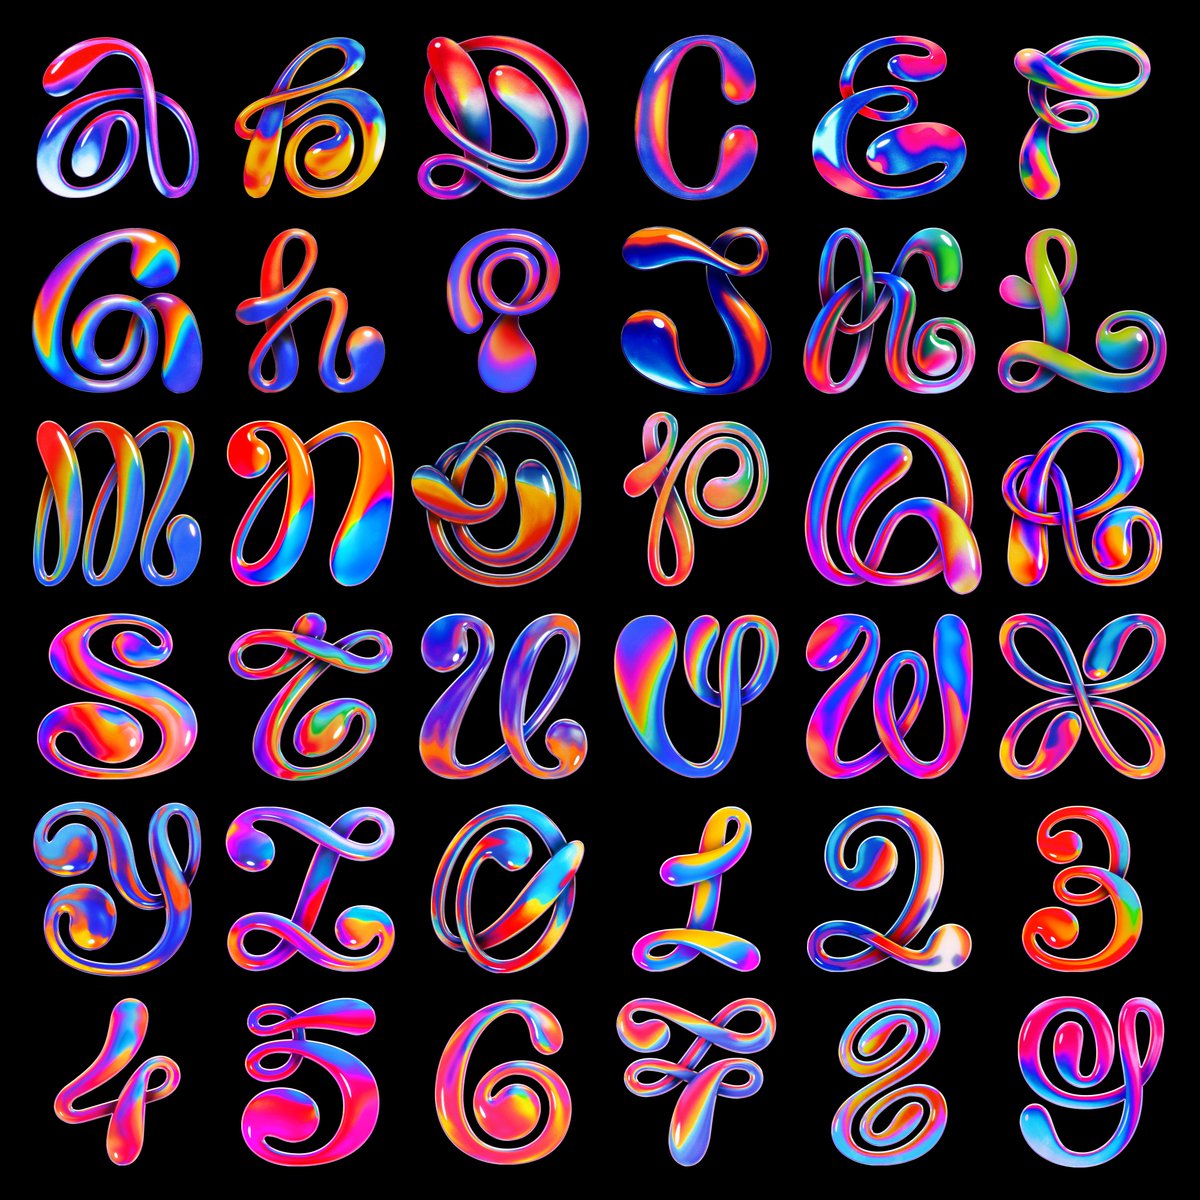 I completely forgot to upload this here, but here's an overview of my 36 Days of Type designs.

#36daysoftype_all